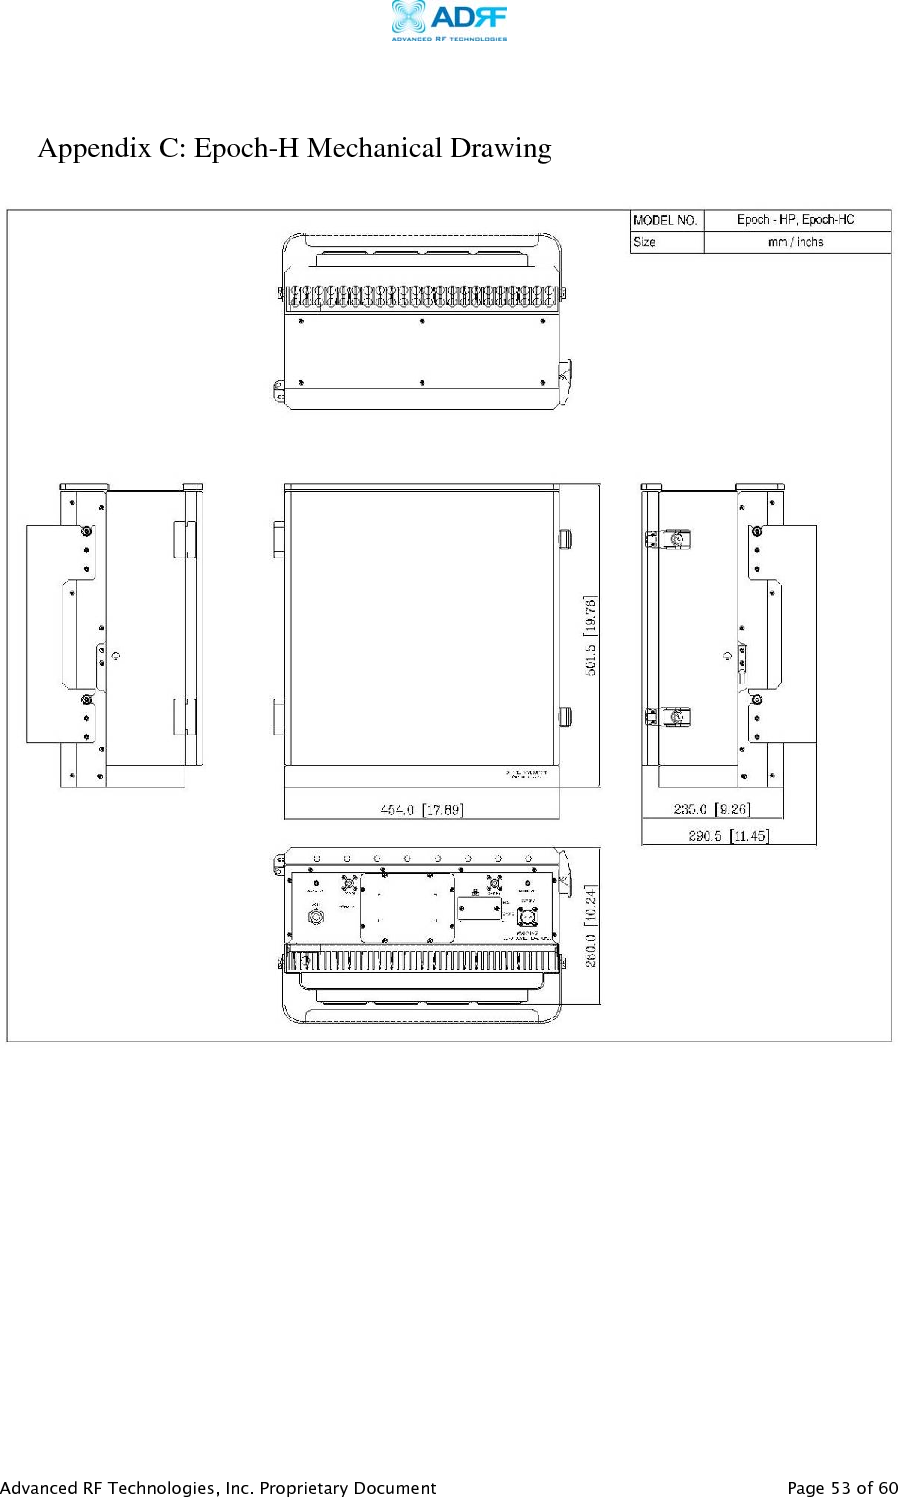     Advanced RF Technologies, Inc. Proprietary Document   Page 53 of 60   Appendix C: Epoch-H Mechanical Drawing    